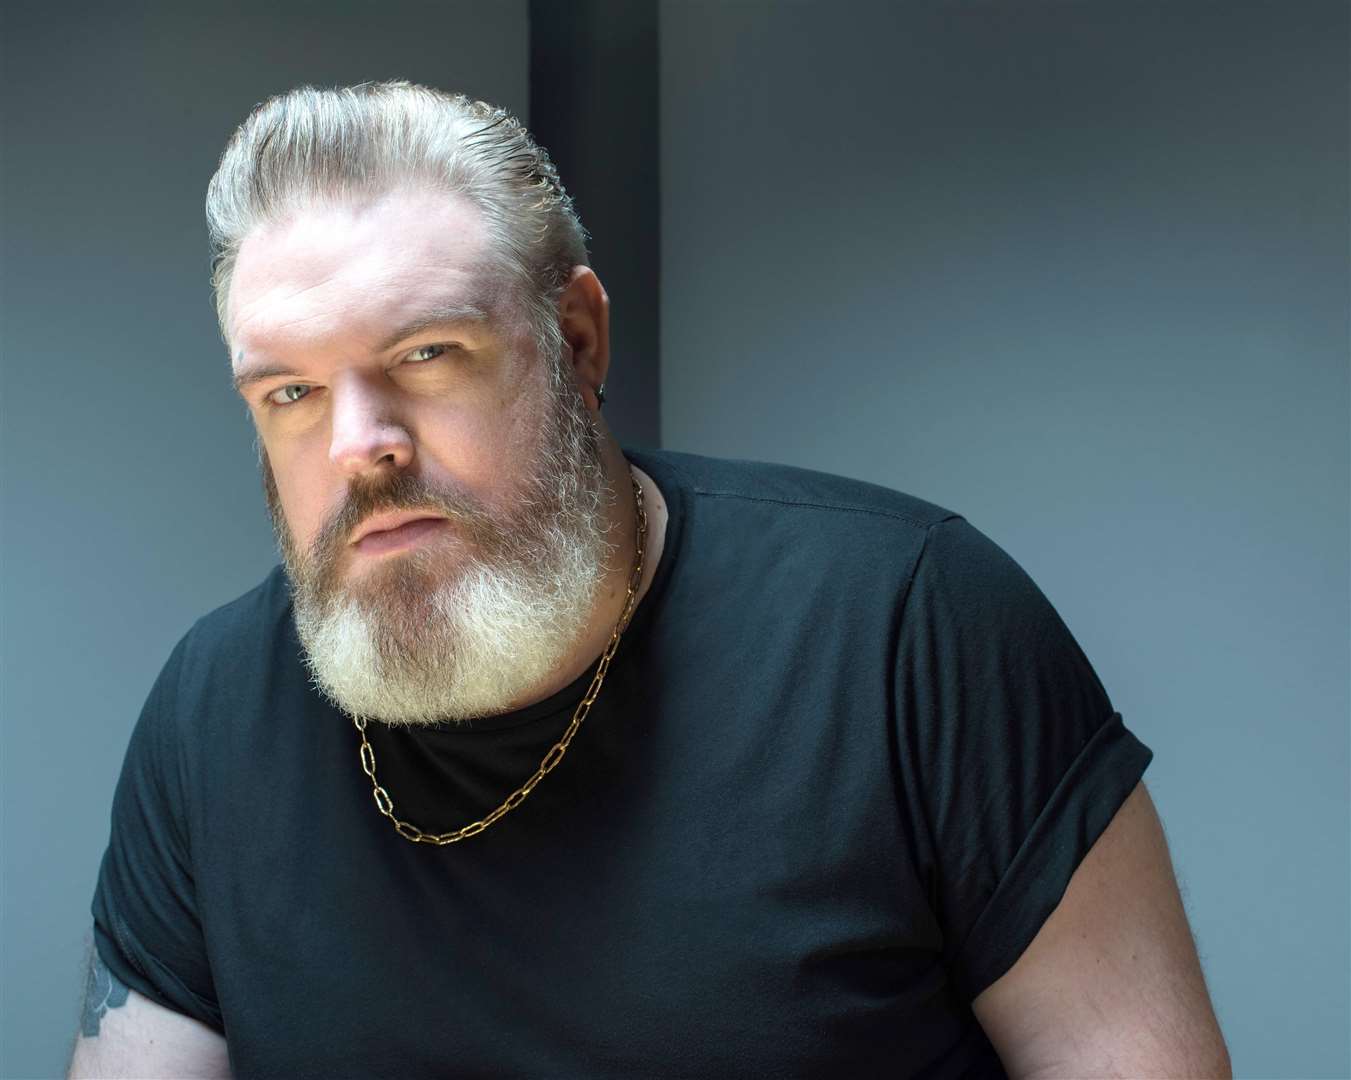 Game of Thrones actor Kristian Nairn, who played Hodor